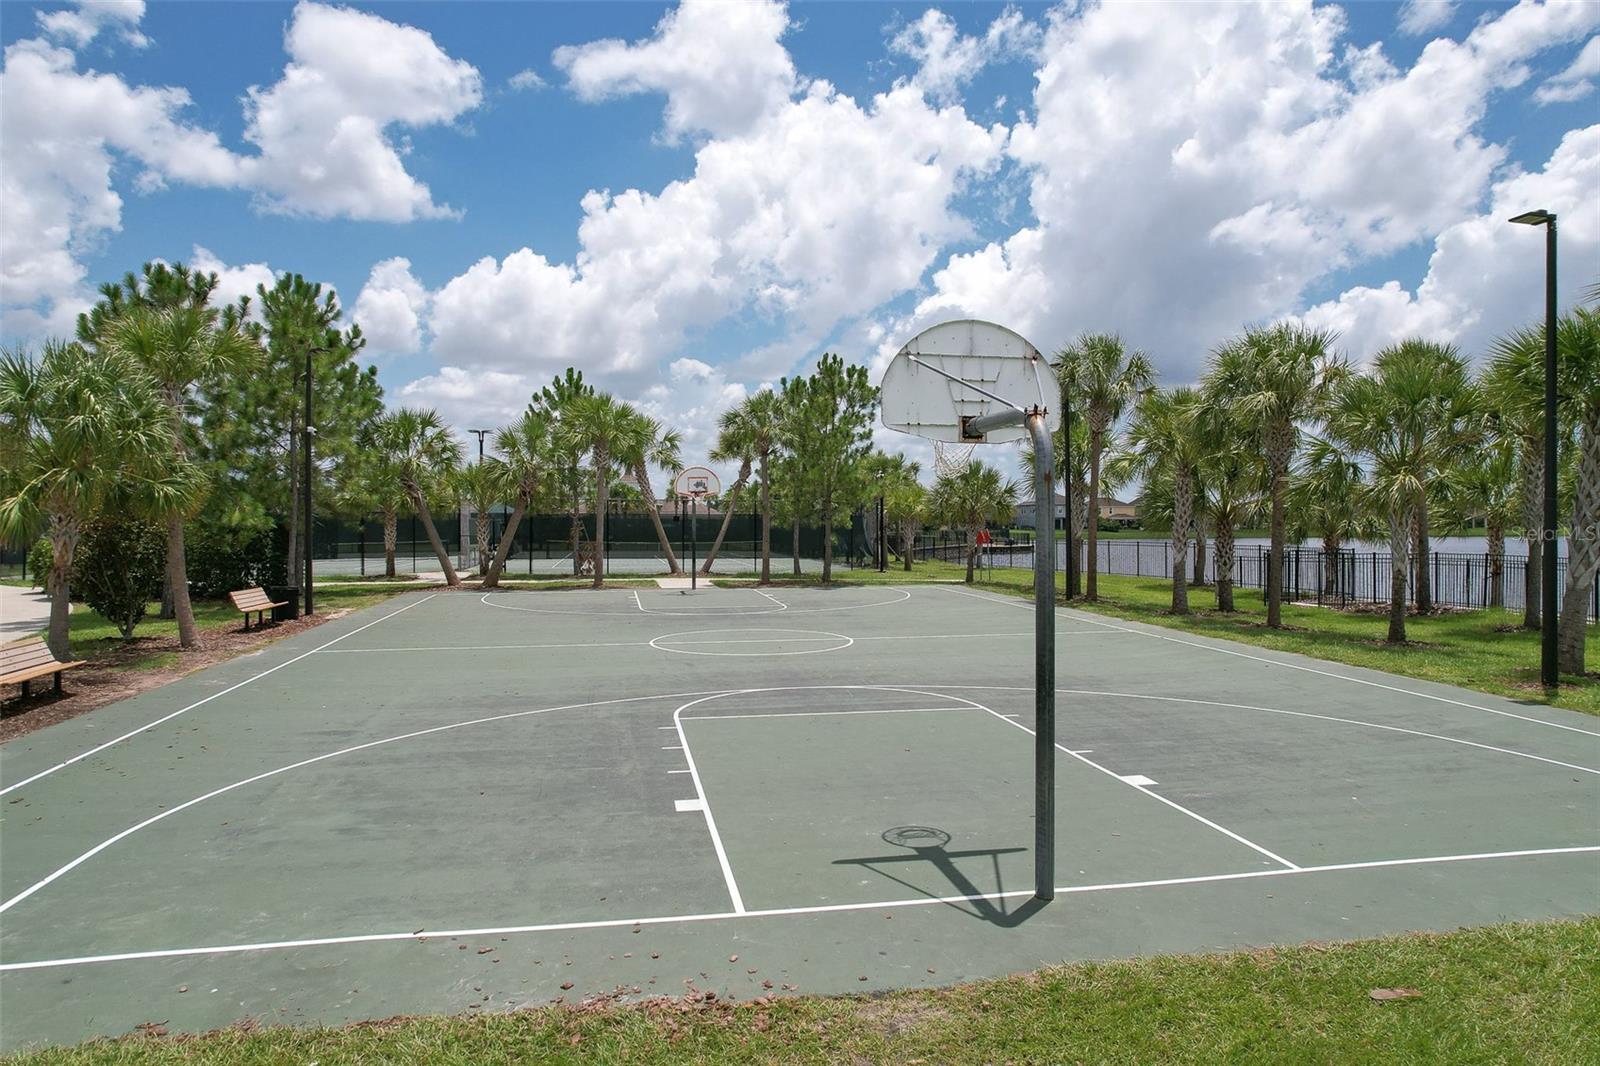 Basketball court near pond at the community center.